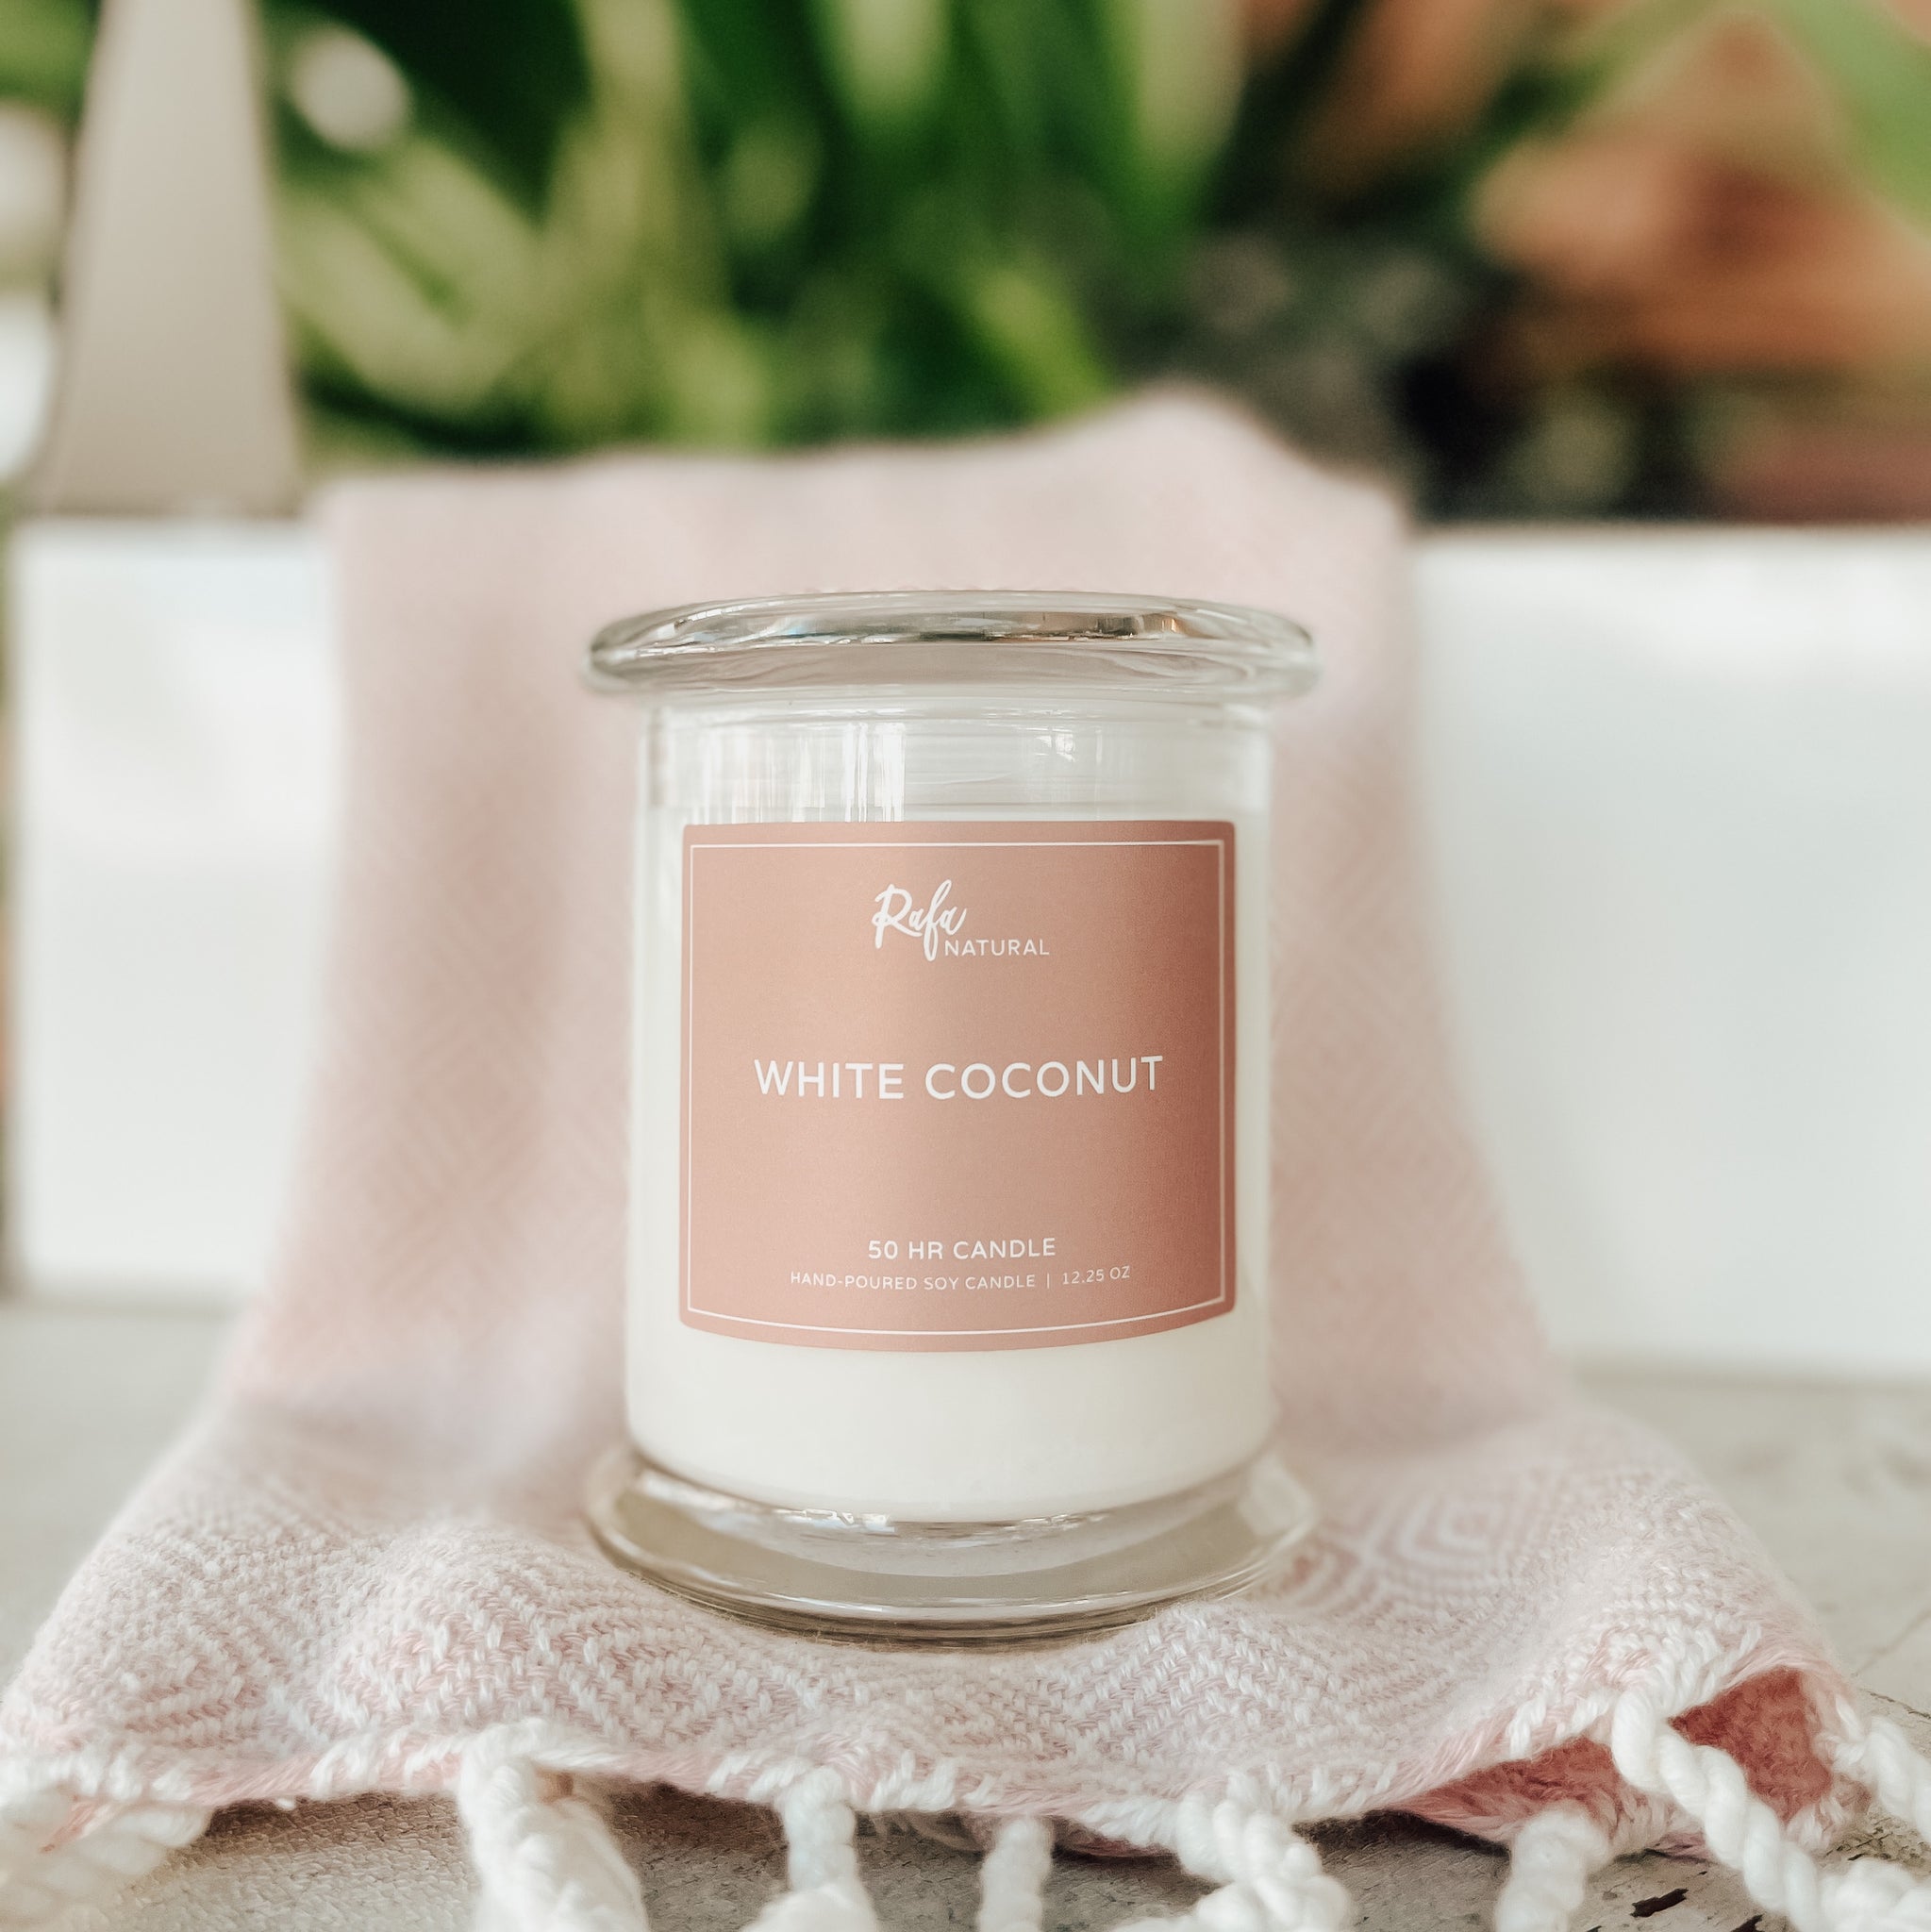 50Hr White Coconut Soy Candle